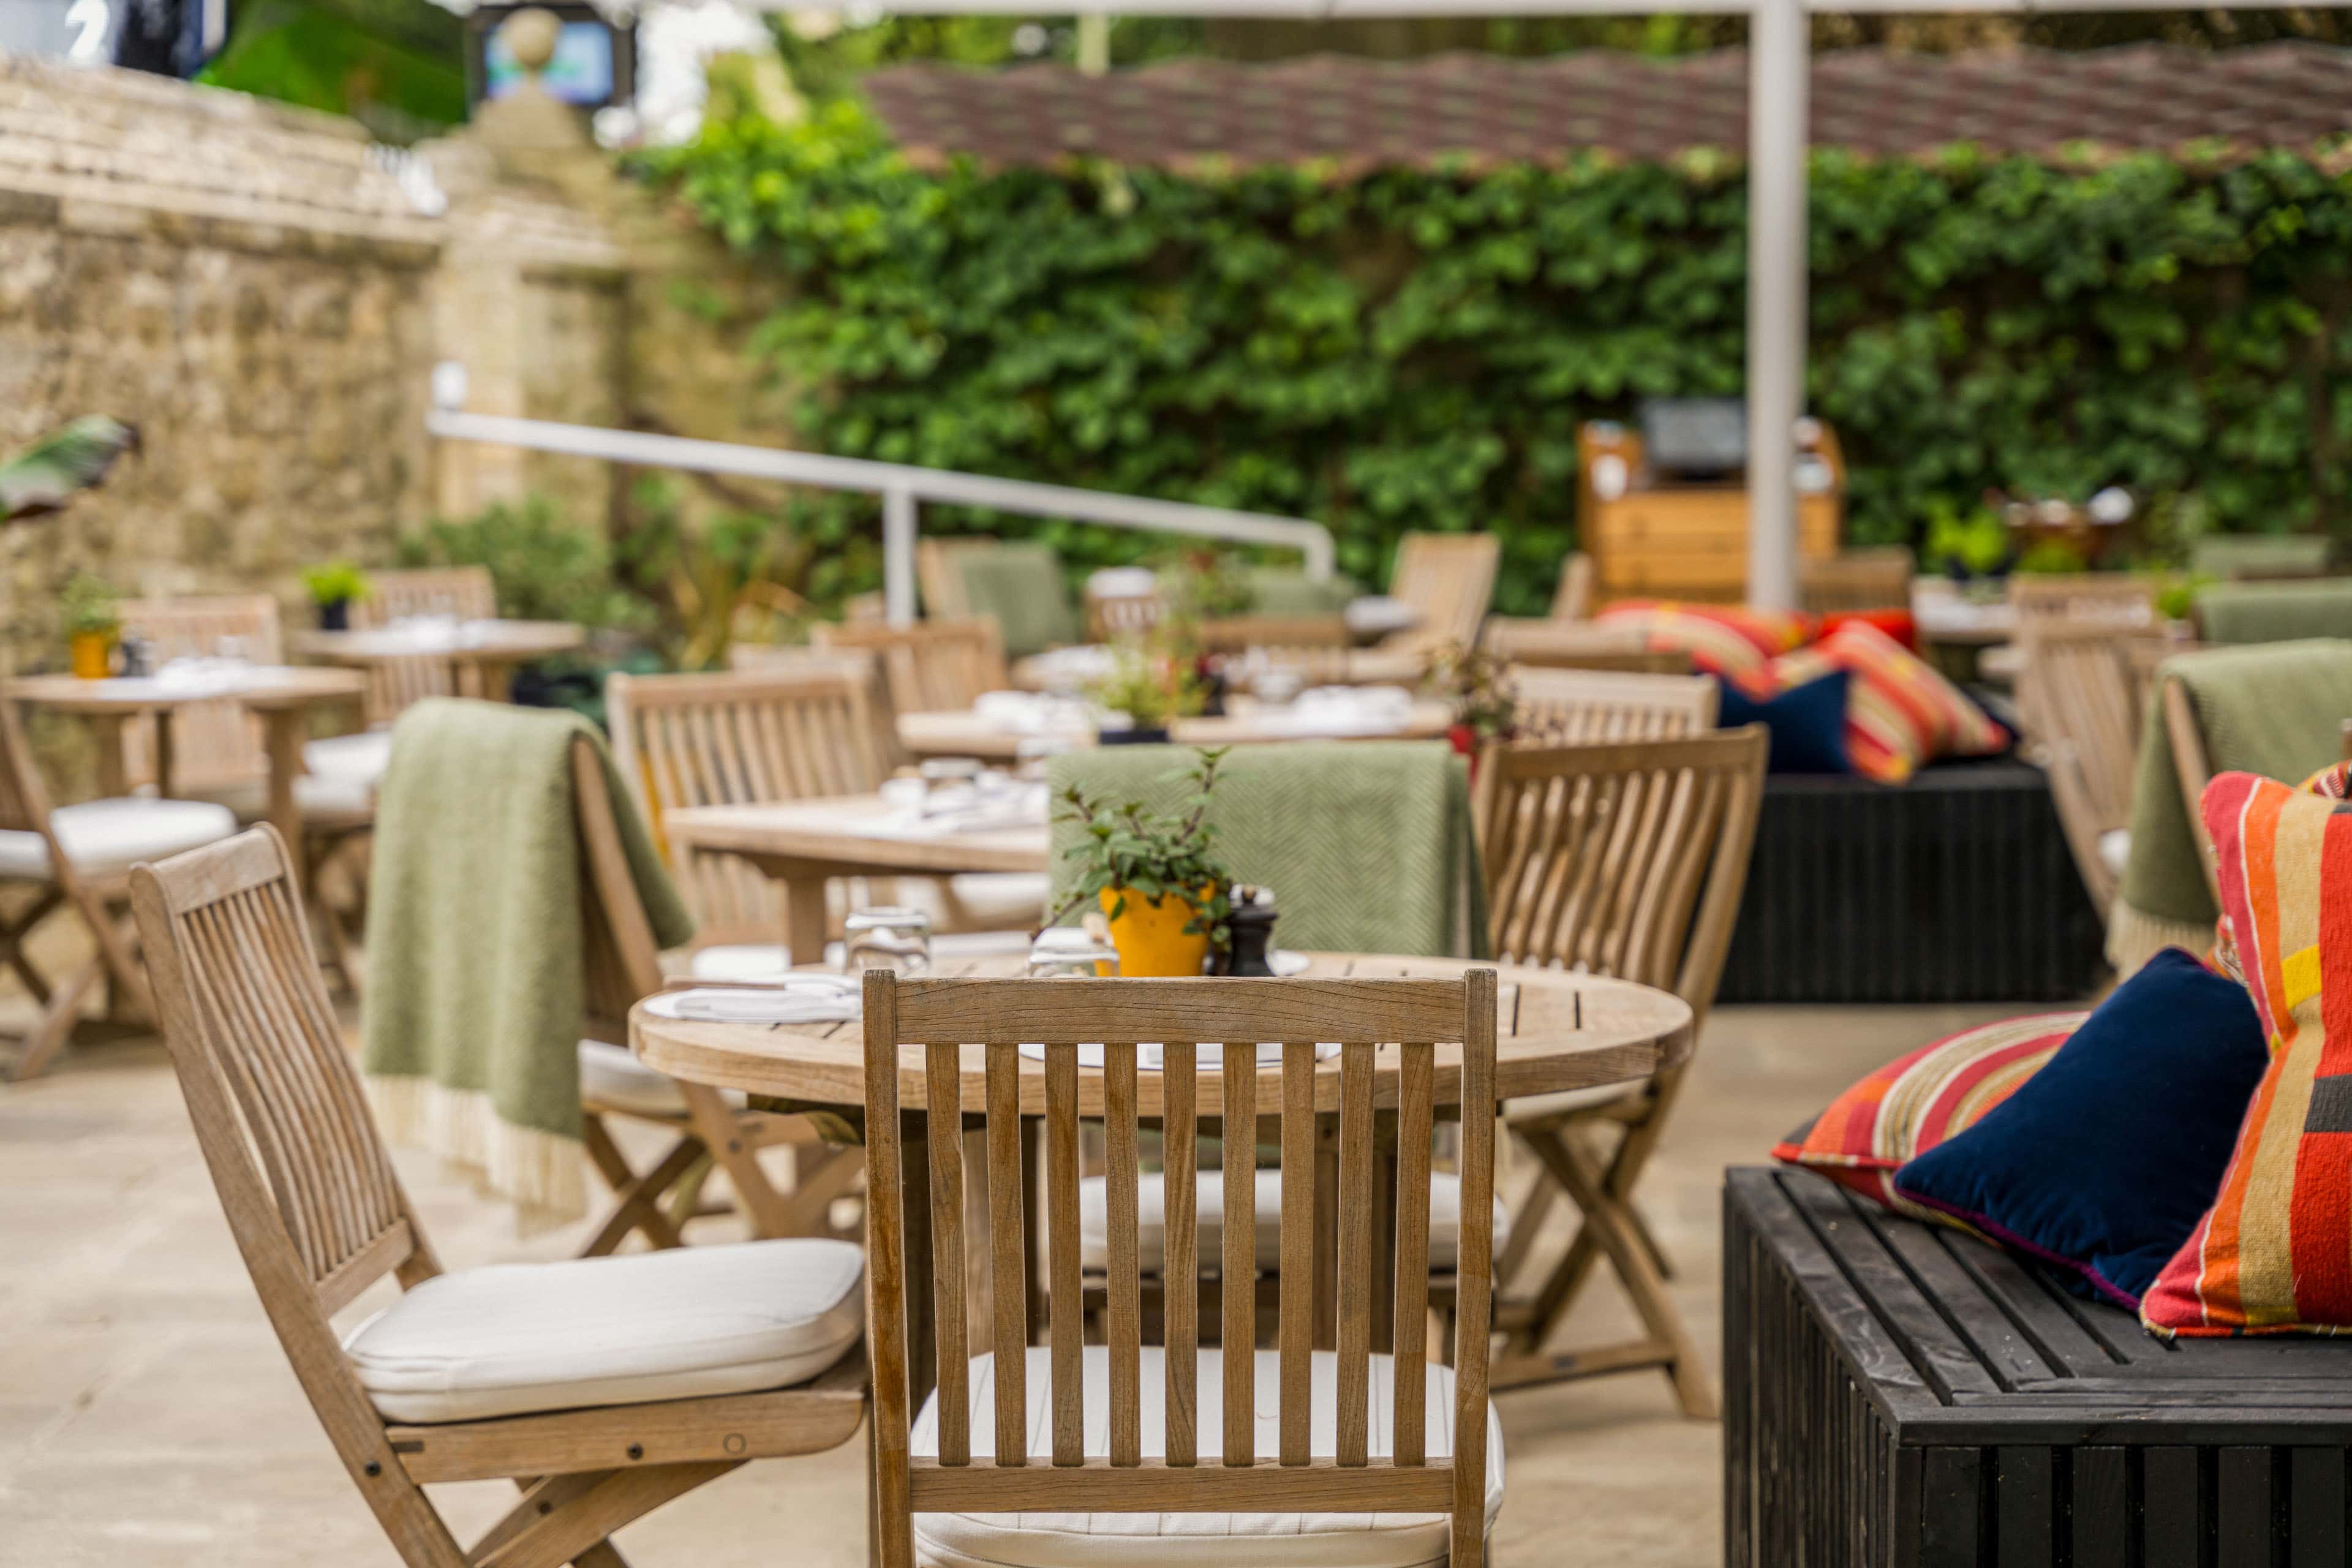 A7R03841 - 2024 - Parsonage Grill - Oxford - High Res - Outdoor Terrace Seating - Web Hero